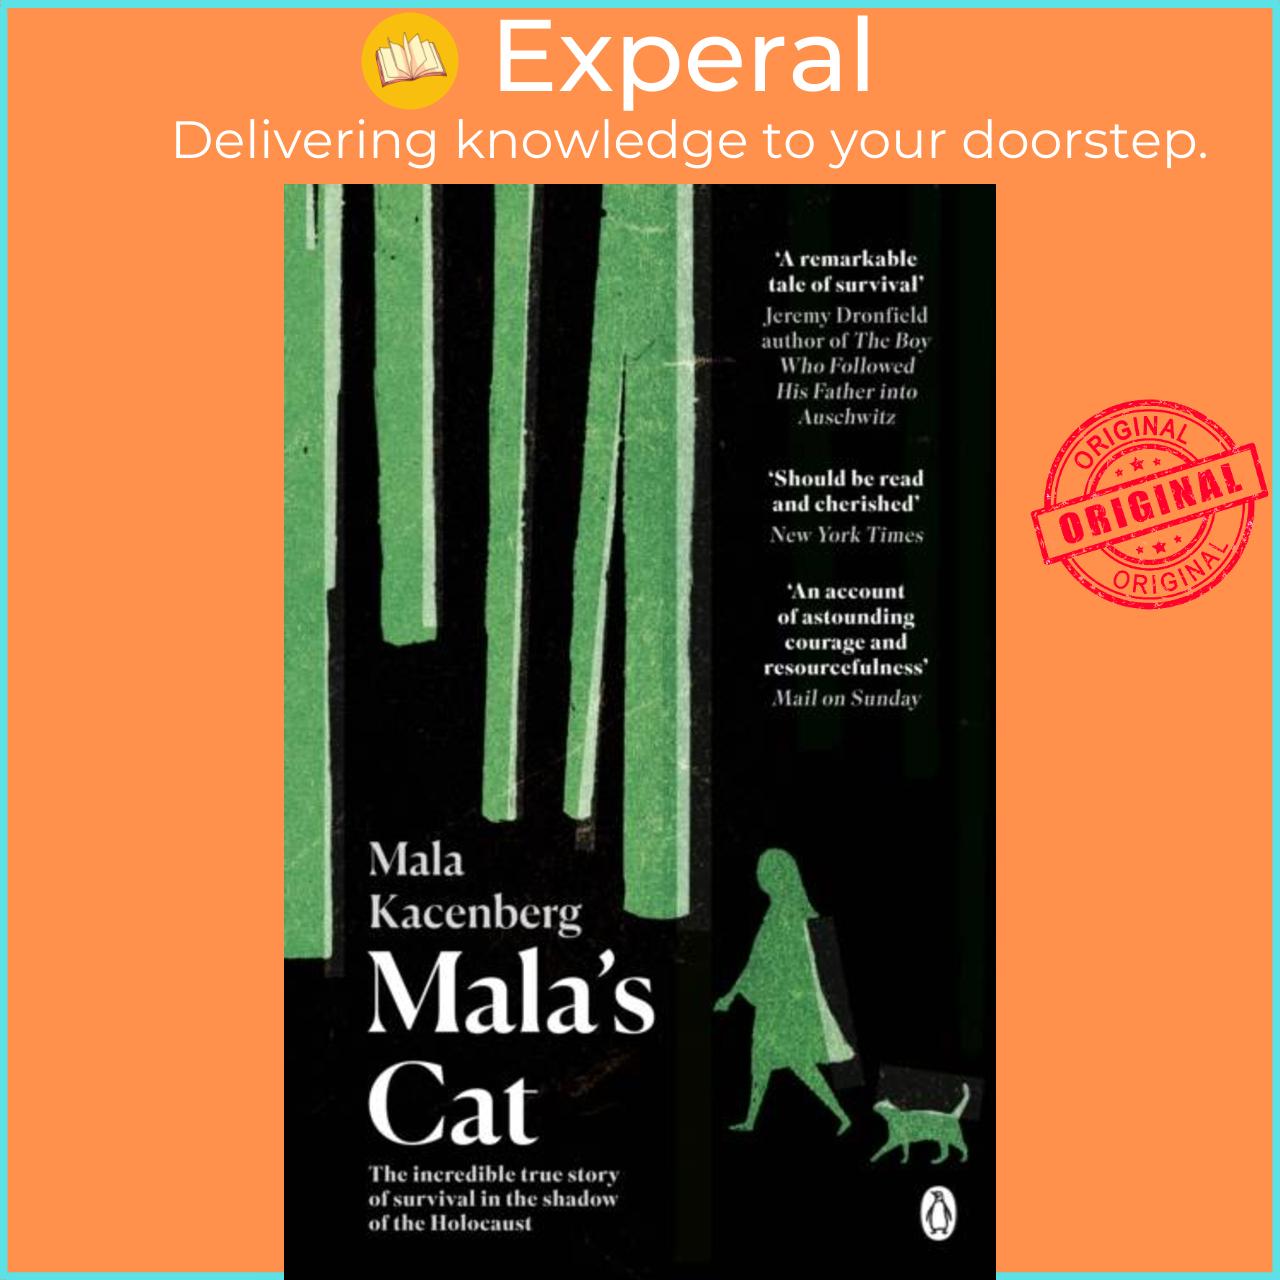 Sách - Mala's Cat - The moving and unforgettable true story of one girl's surv by Mala Kacenberg (UK edition, paperback)